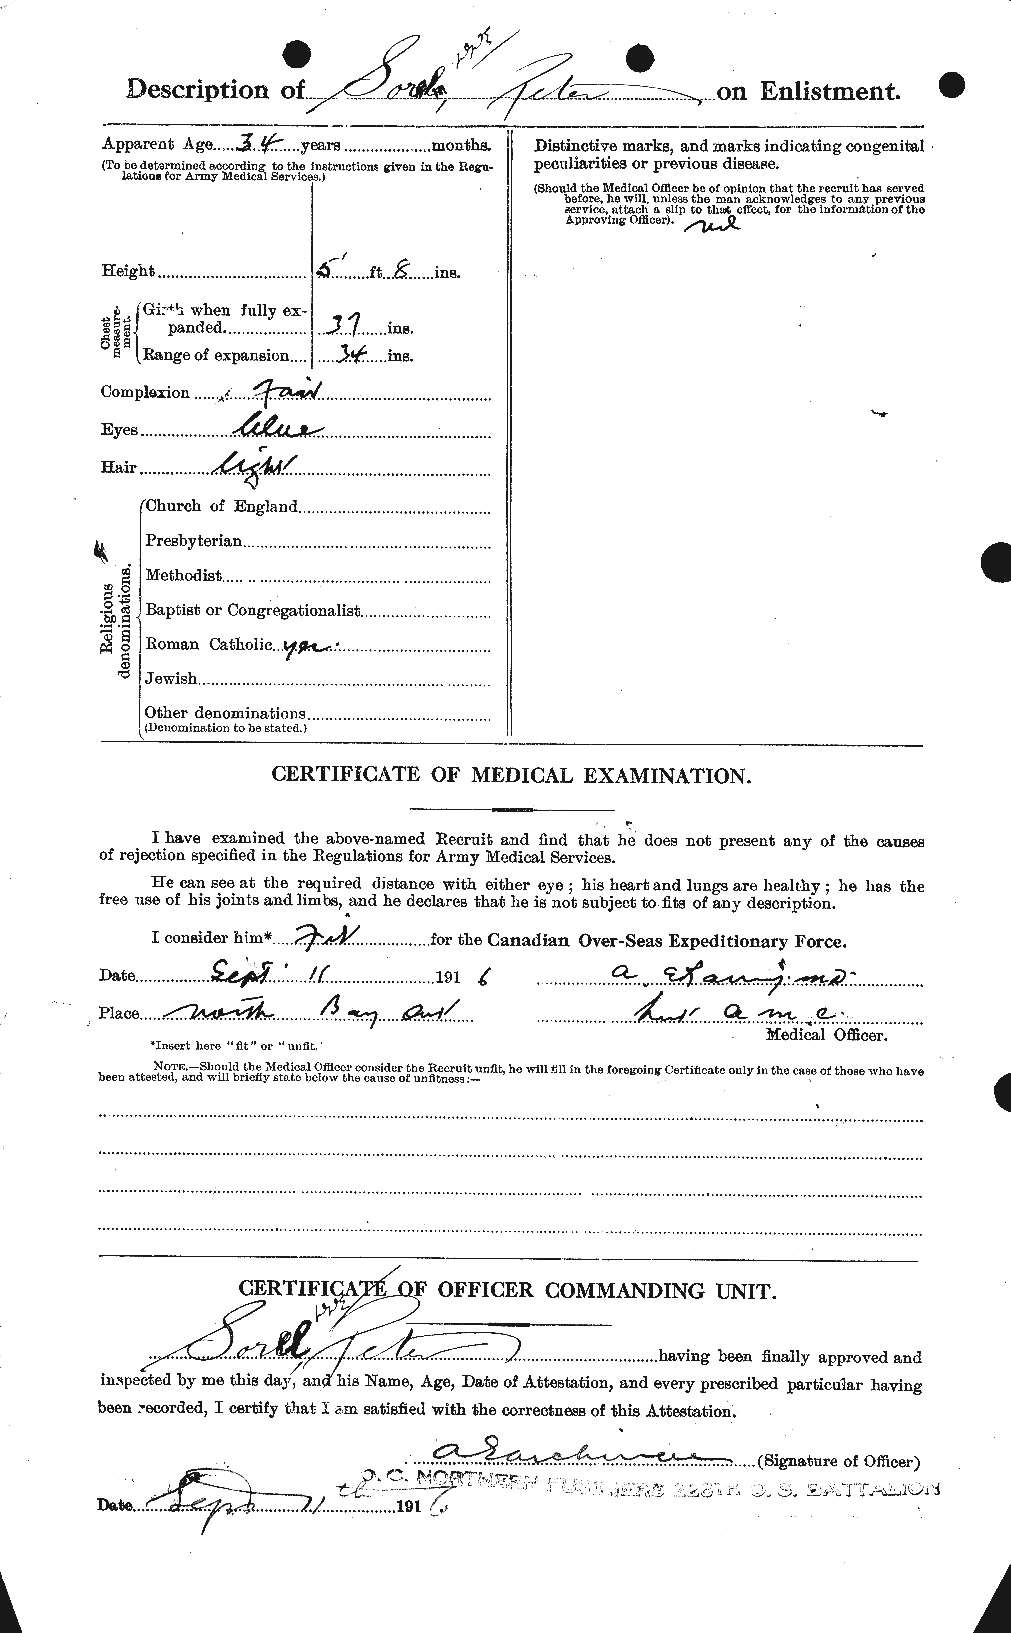 Personnel Records of the First World War - CEF 110177b